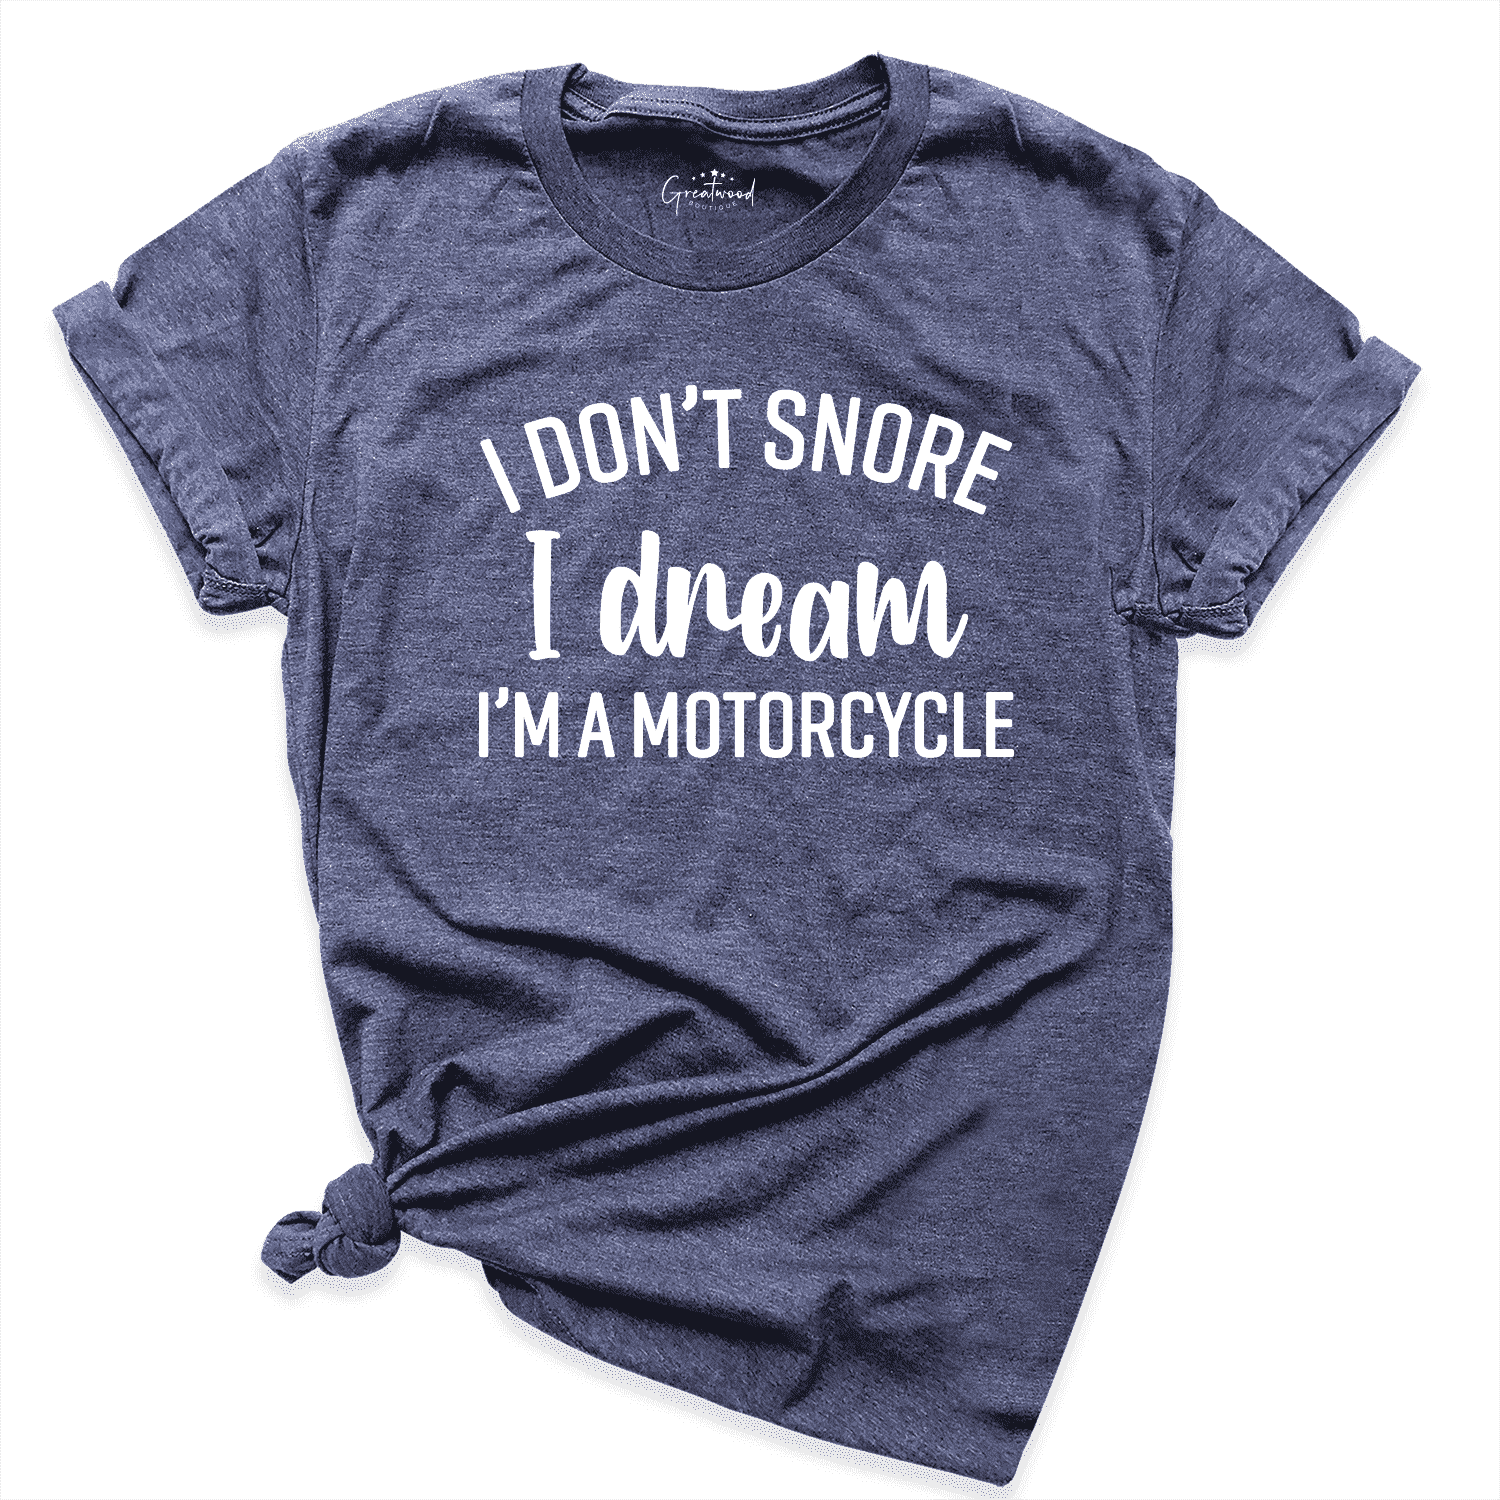 I Don't Snore I Dream I'm A Motorcycle Shirt Navy - Greatwood Boutique